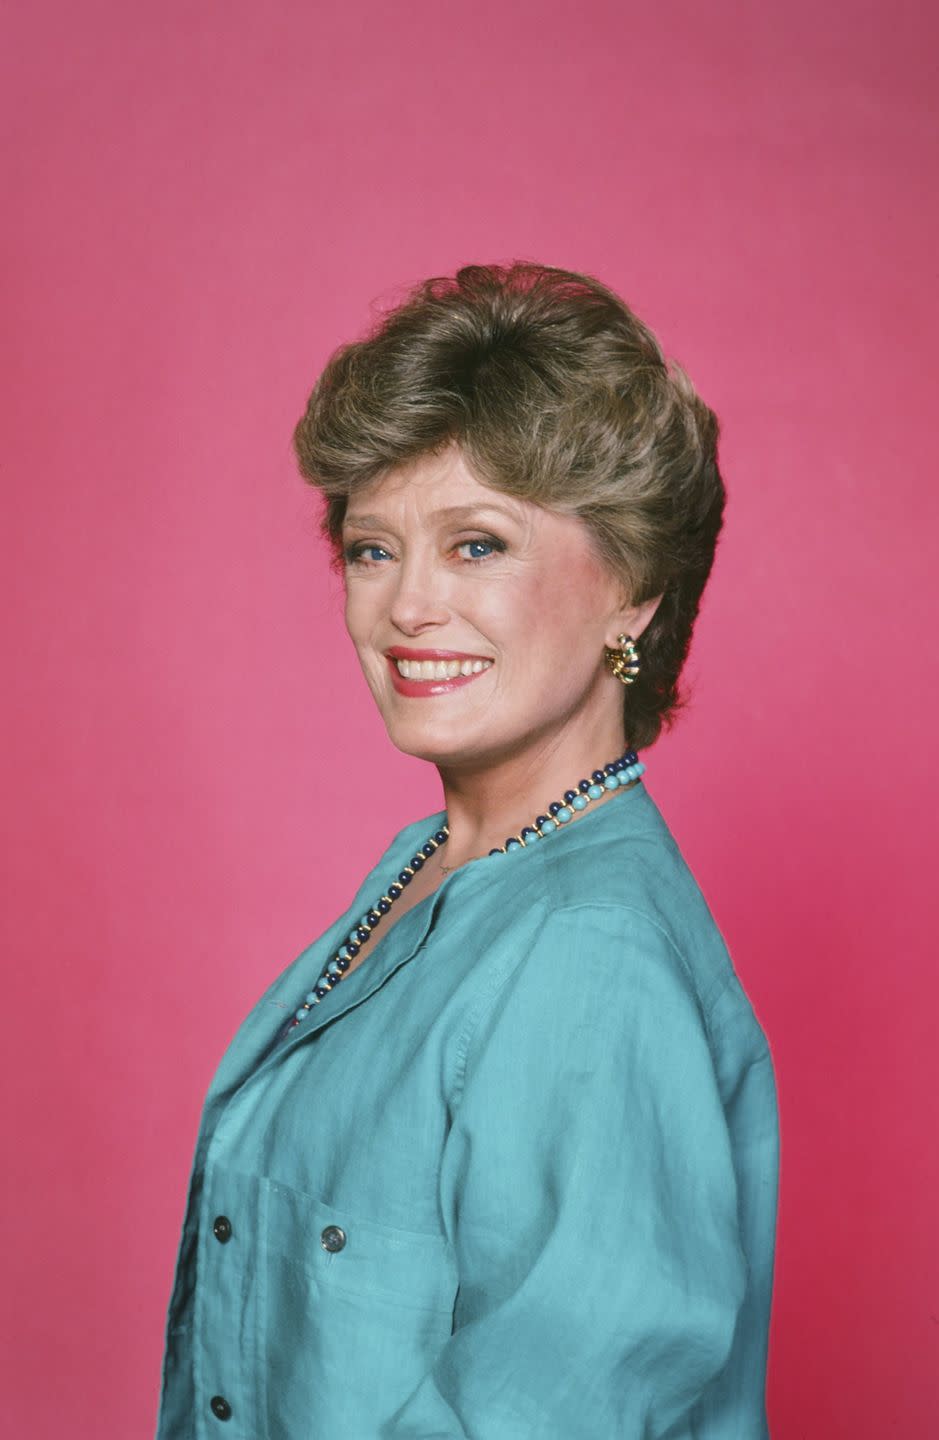 <p>Rue McClanahan, who played Blanche Devereaux, was the <a href="https://en.wikipedia.org/wiki/Rue_McClanahan" rel="nofollow noopener" target="_blank" data-ylk="slk:youngest member of the main cast" class="link ">youngest member of the main cast</a> when the show began. She was born in 1934, making her 51 when the show started in 1985. </p>